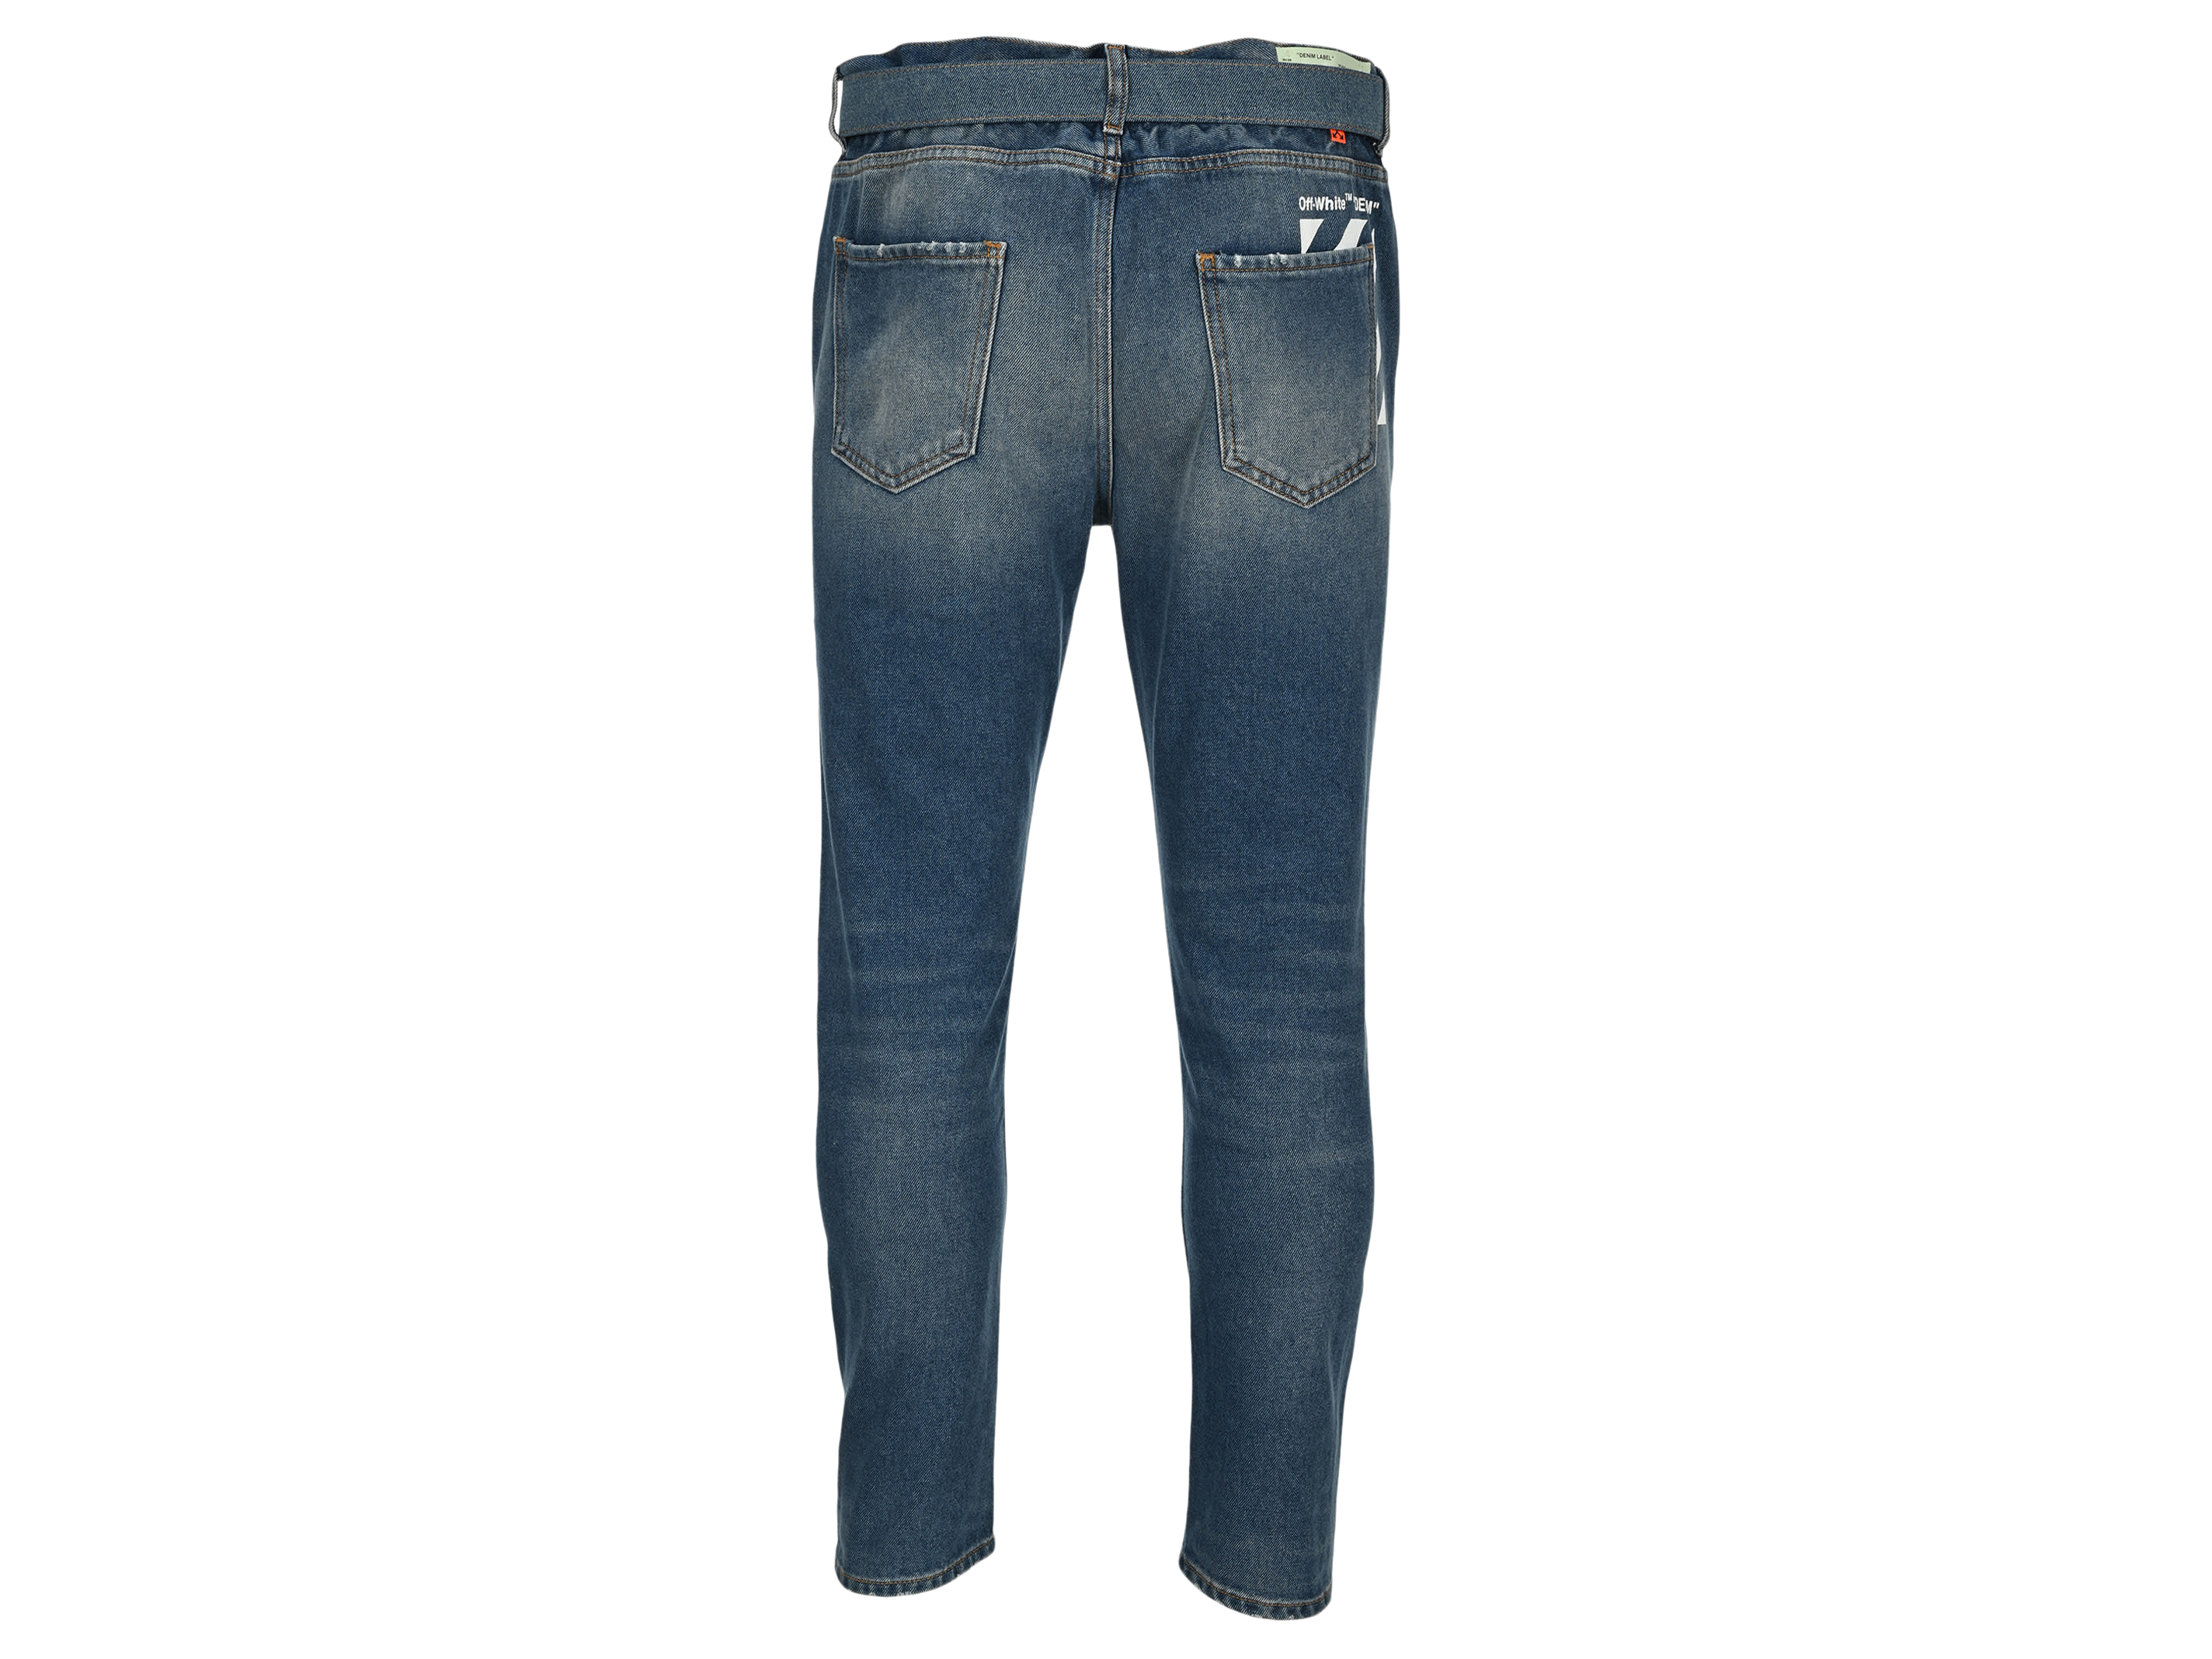 OFF-WHITE Belted Low Crotch Slim Fit Denim Jeans Medium Blue/White